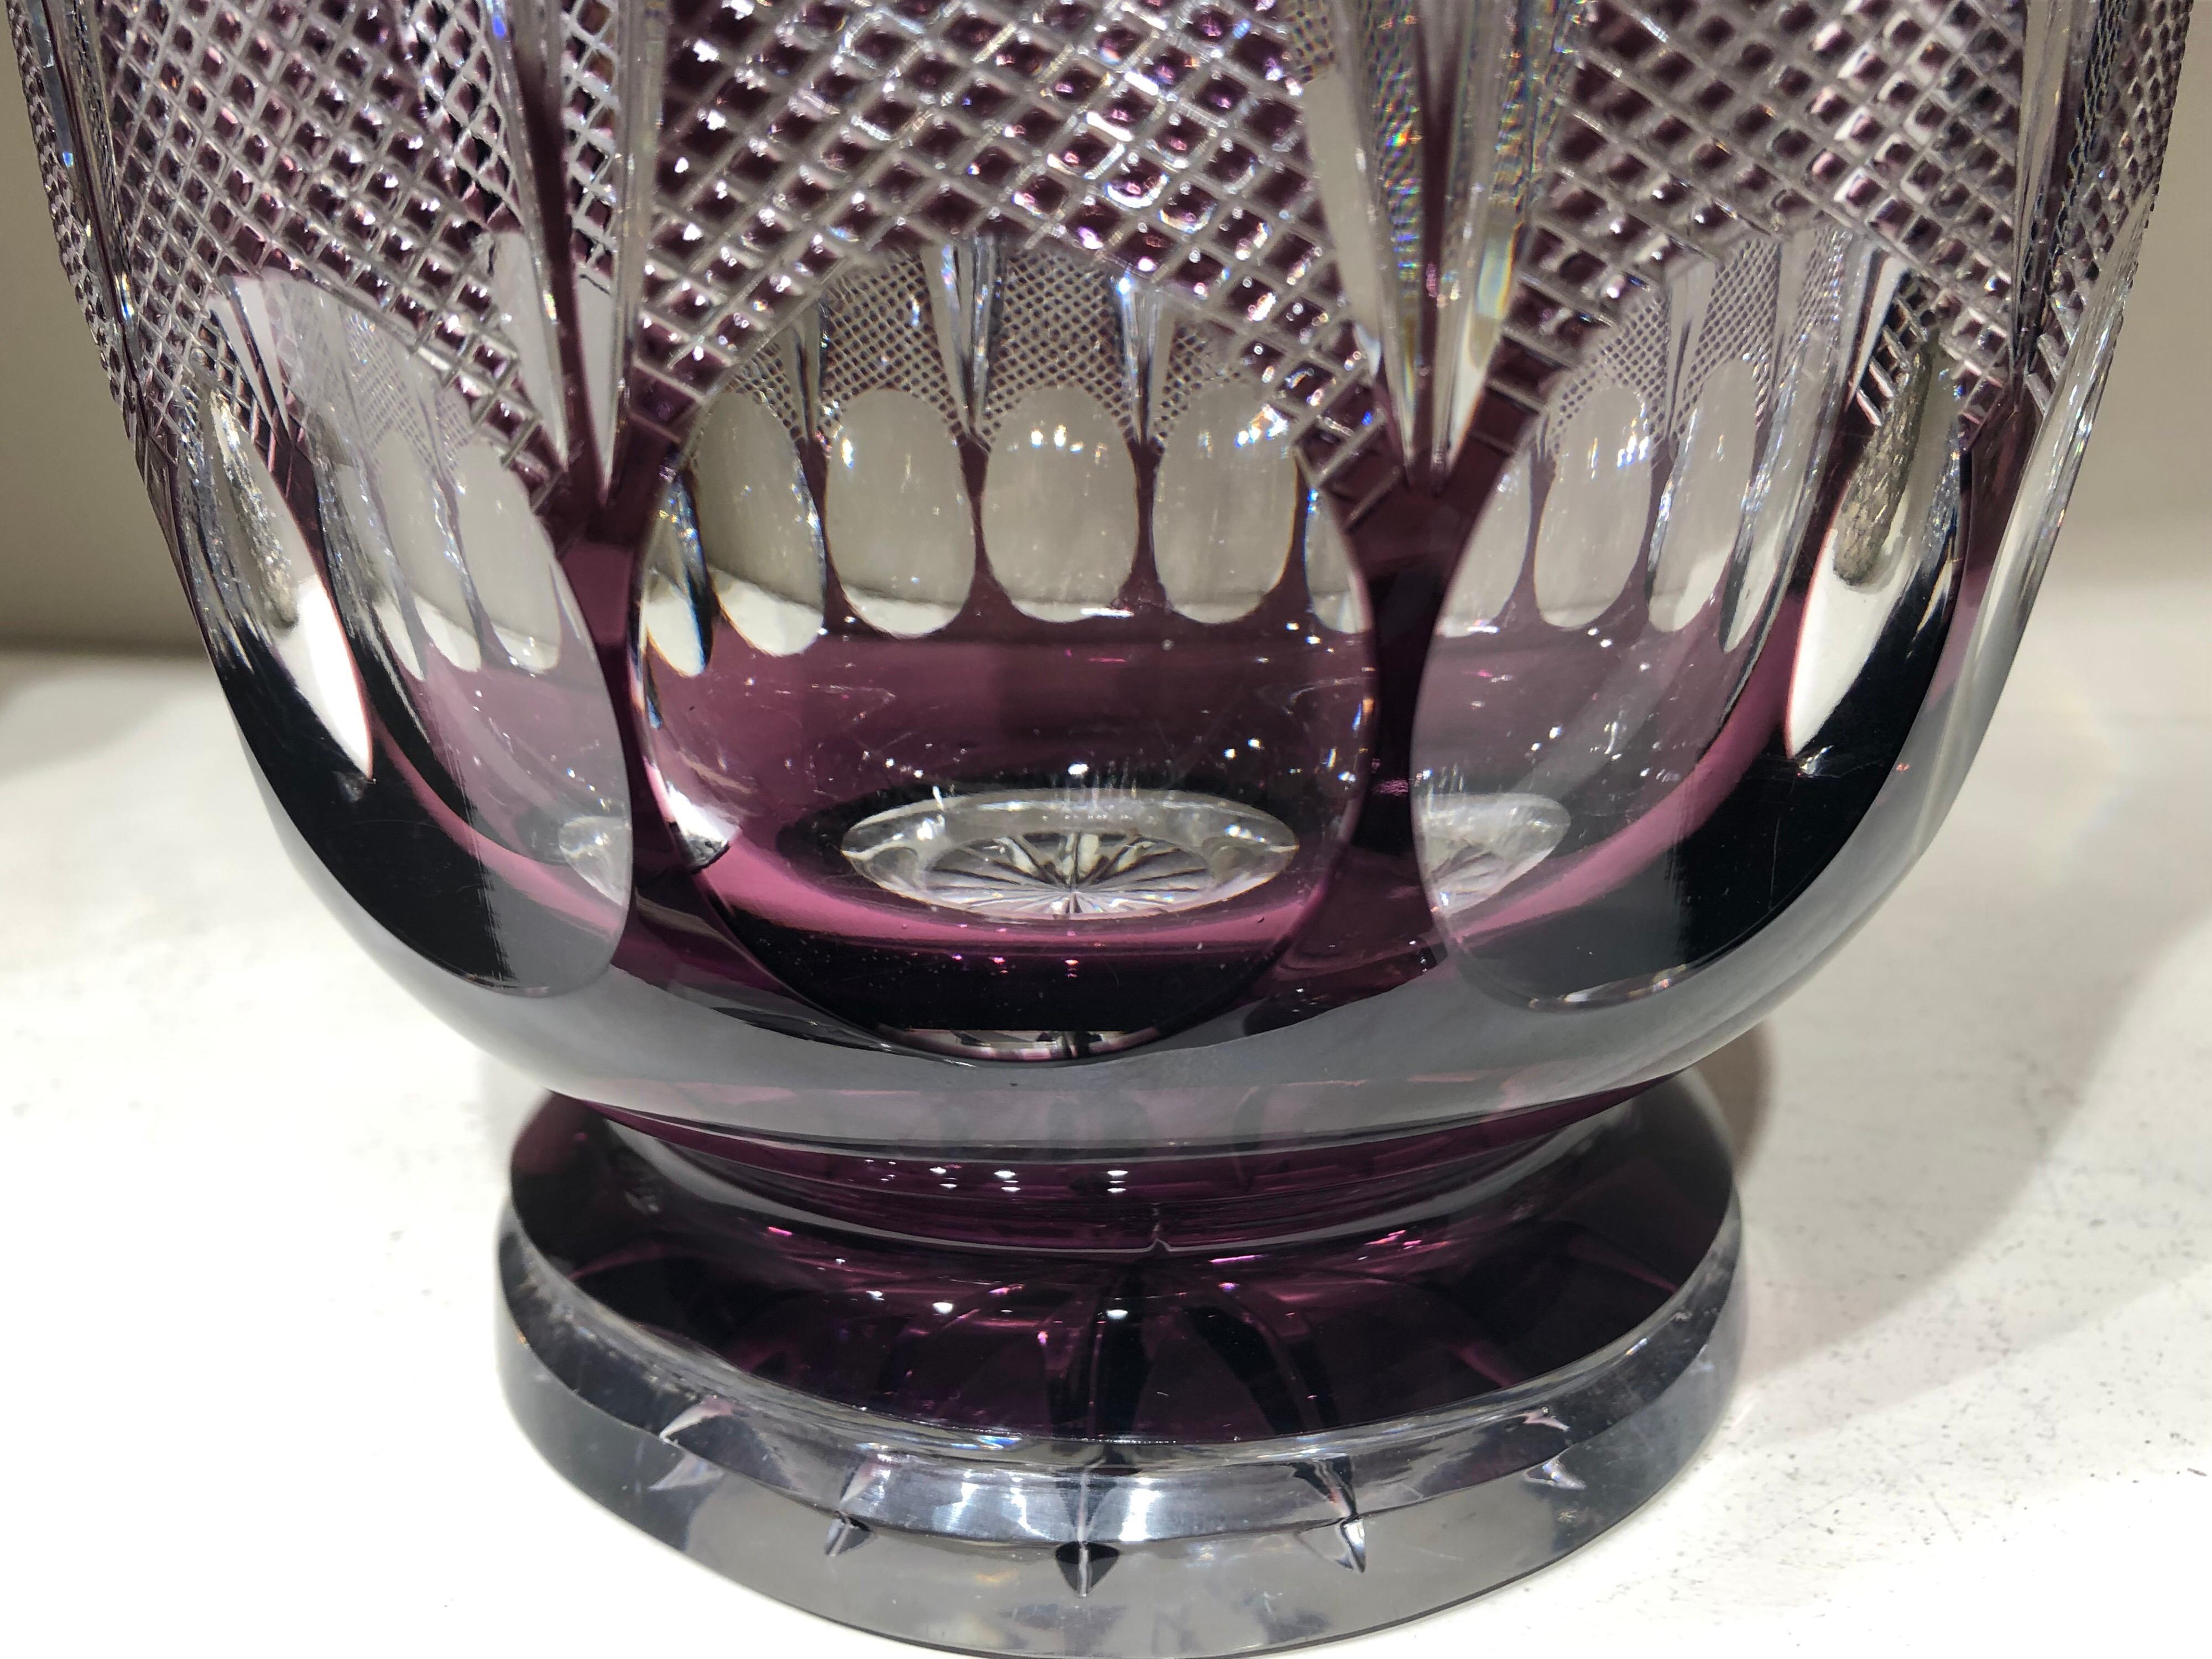 Belgian Val St Lambert Large and Heavy Crystal Vase in Amethyst and Clear Glass